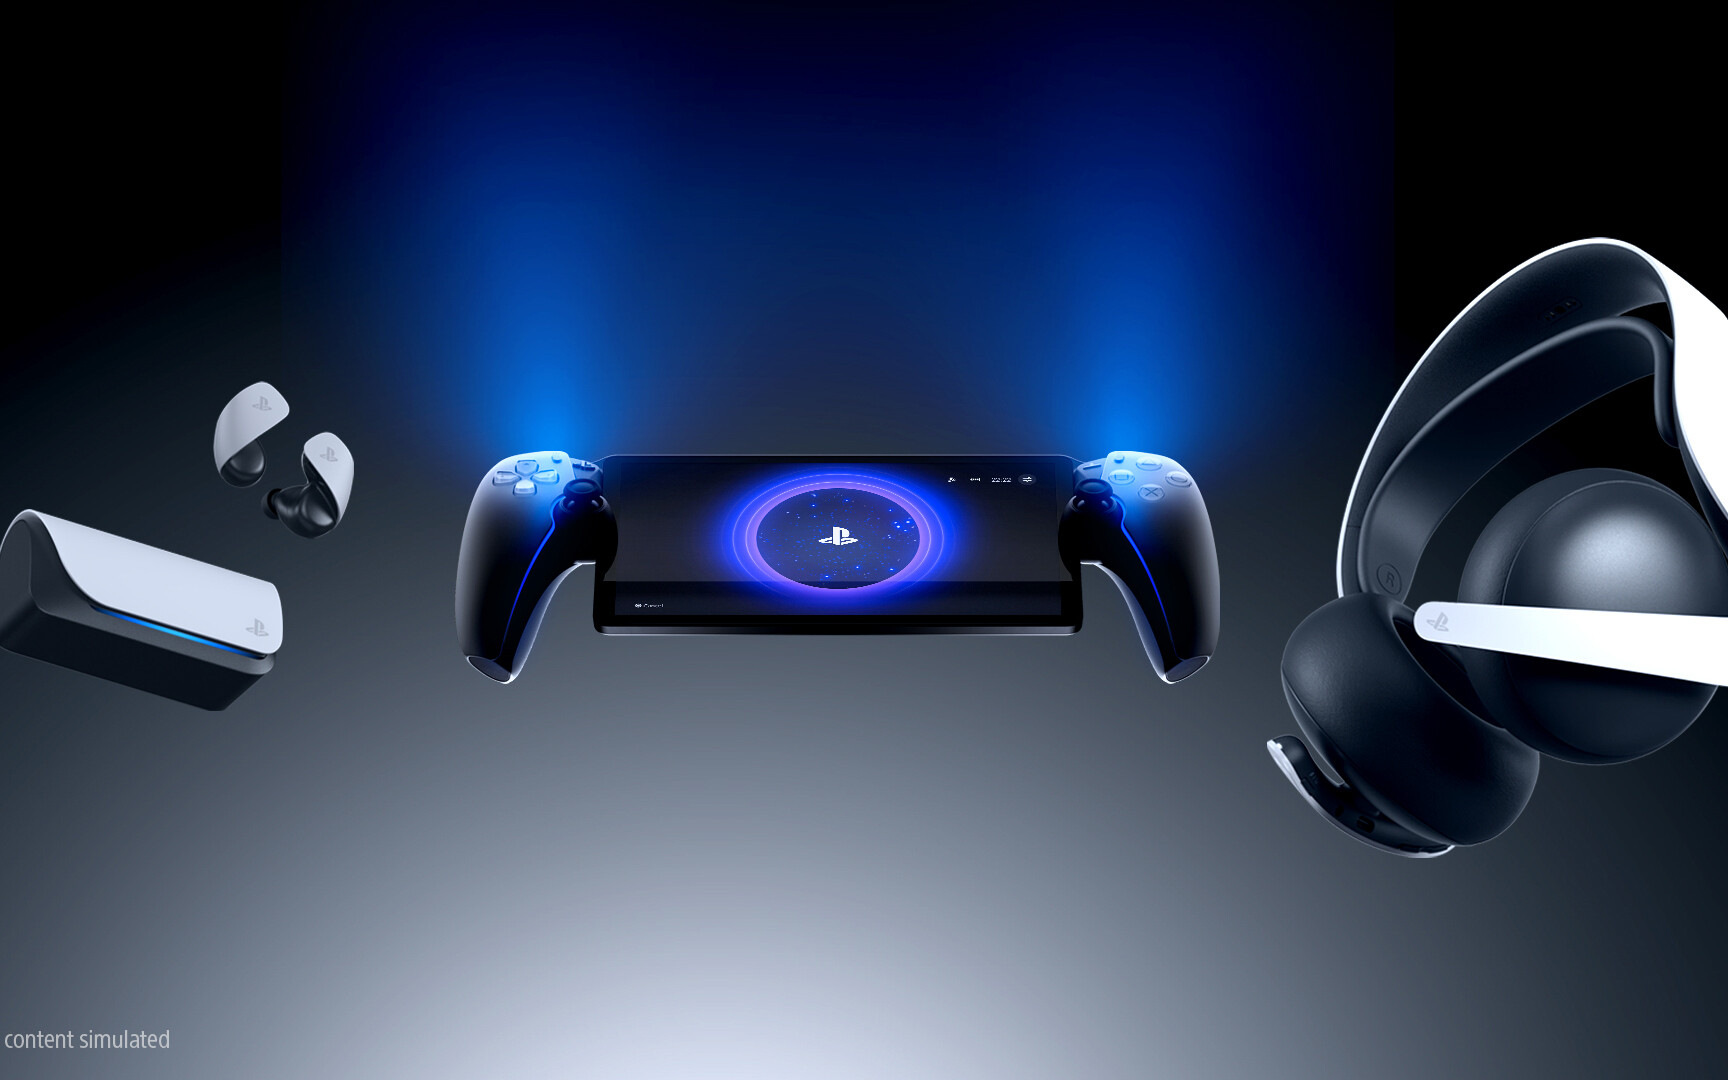 PlayStation Portal Revealed!  We know the first details and the price of the handheld console